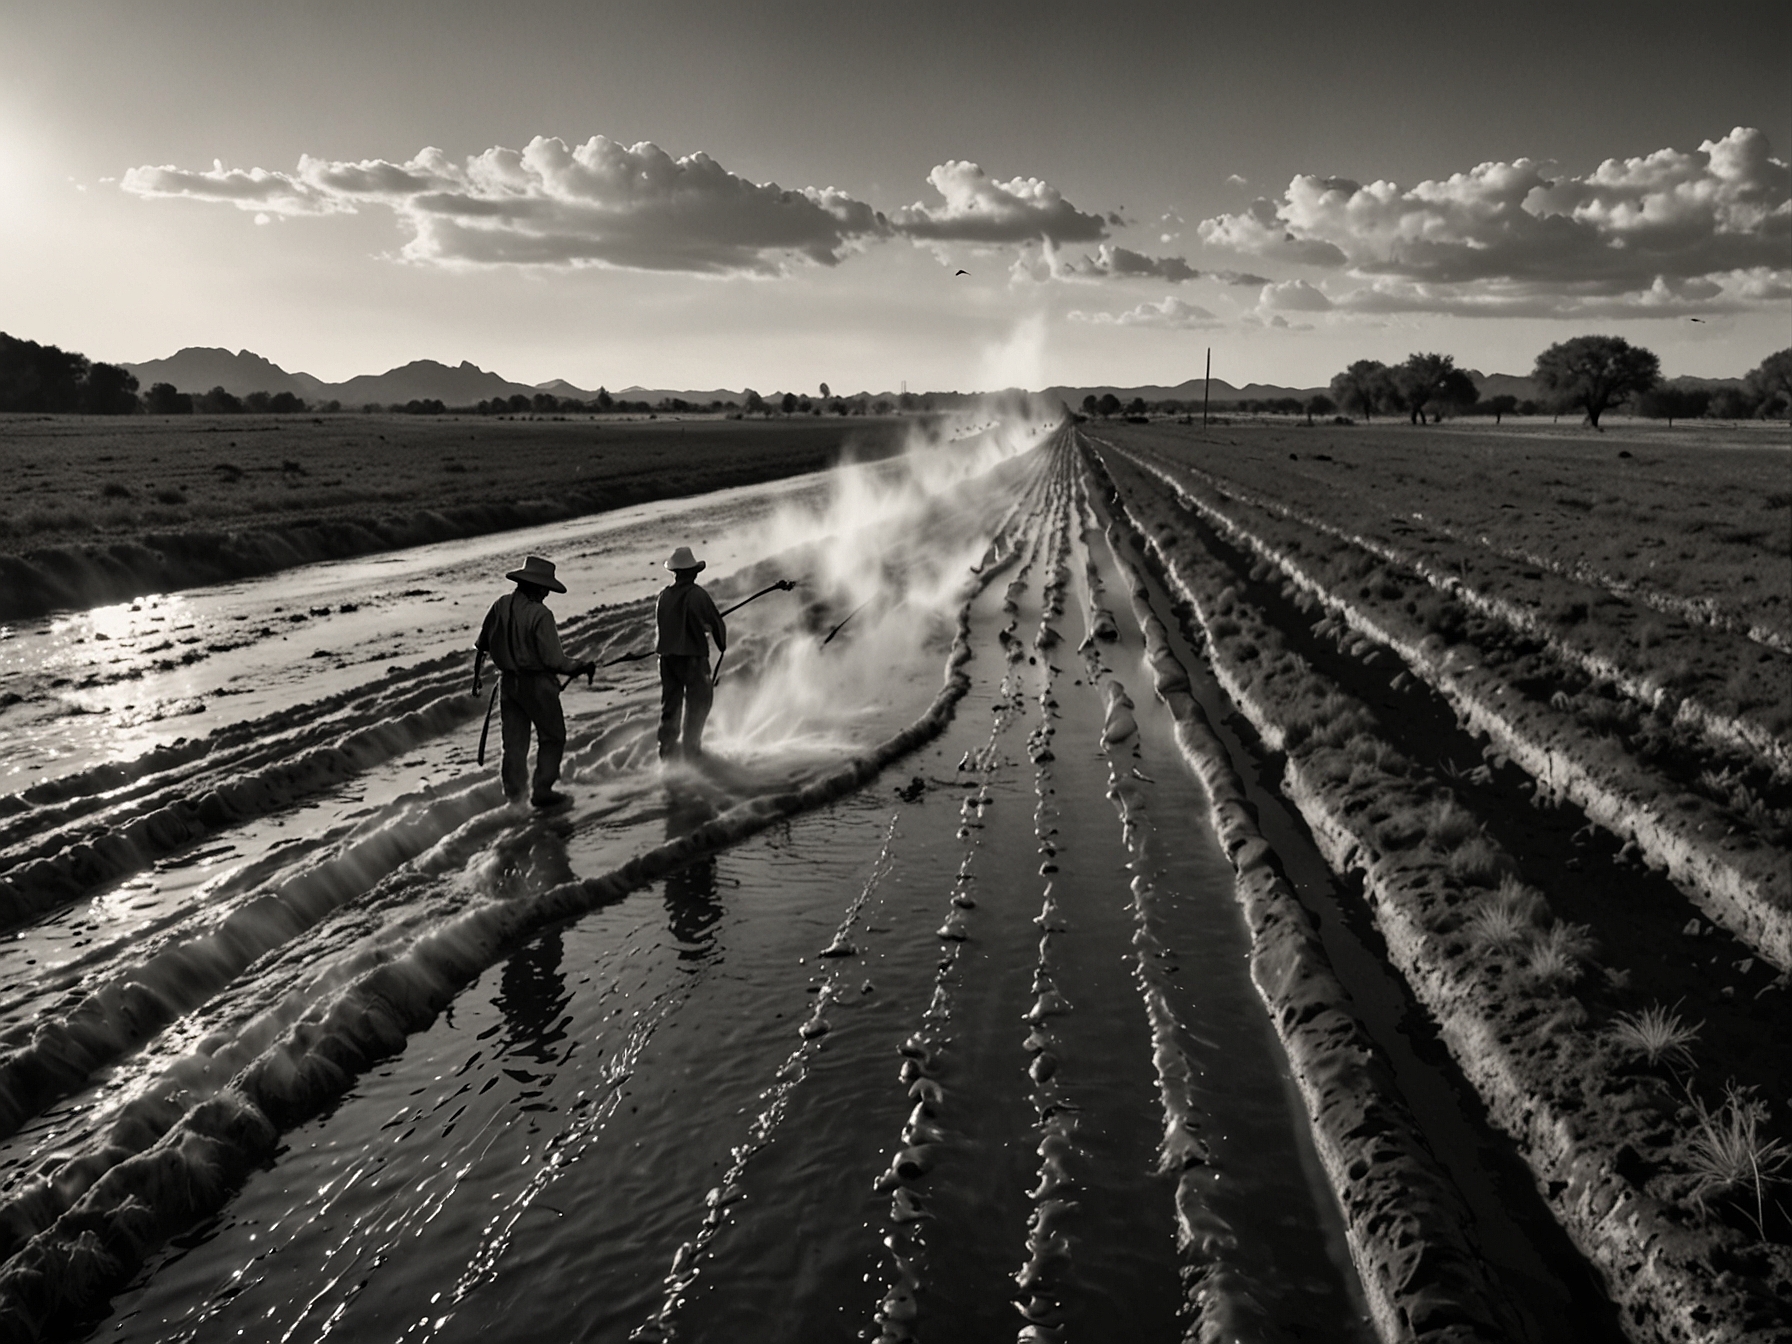 Farmers irrigating fields along the Rio Grande in Texas, emphasizing the importance of water allocations for agricultural productivity and the potential impact of the Supreme Court's decision.